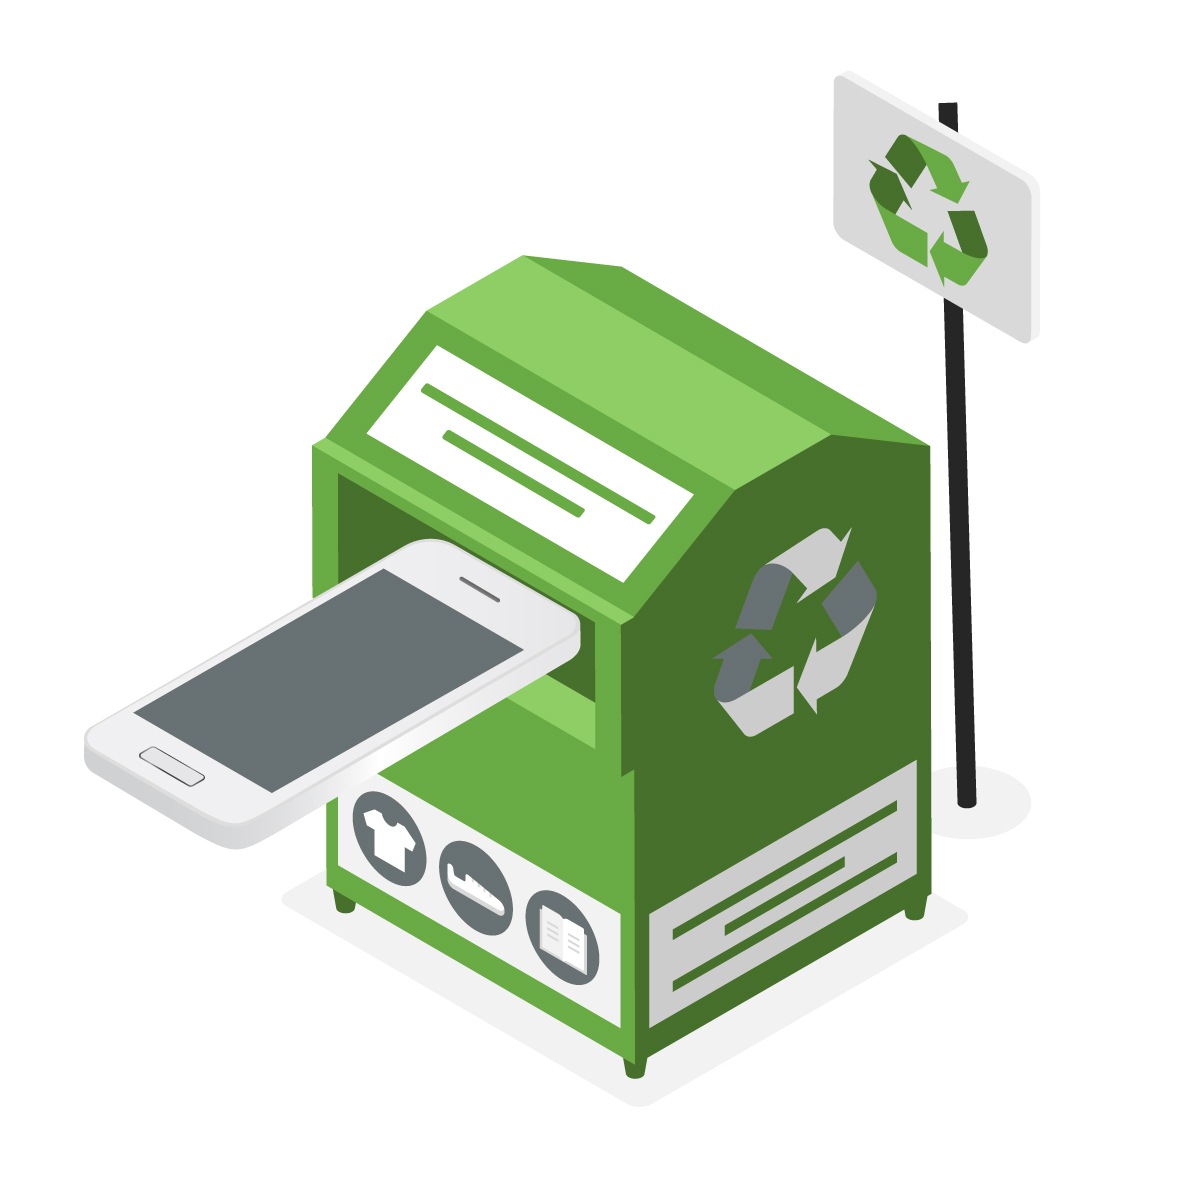 Isometric image of mobile phone recycling.